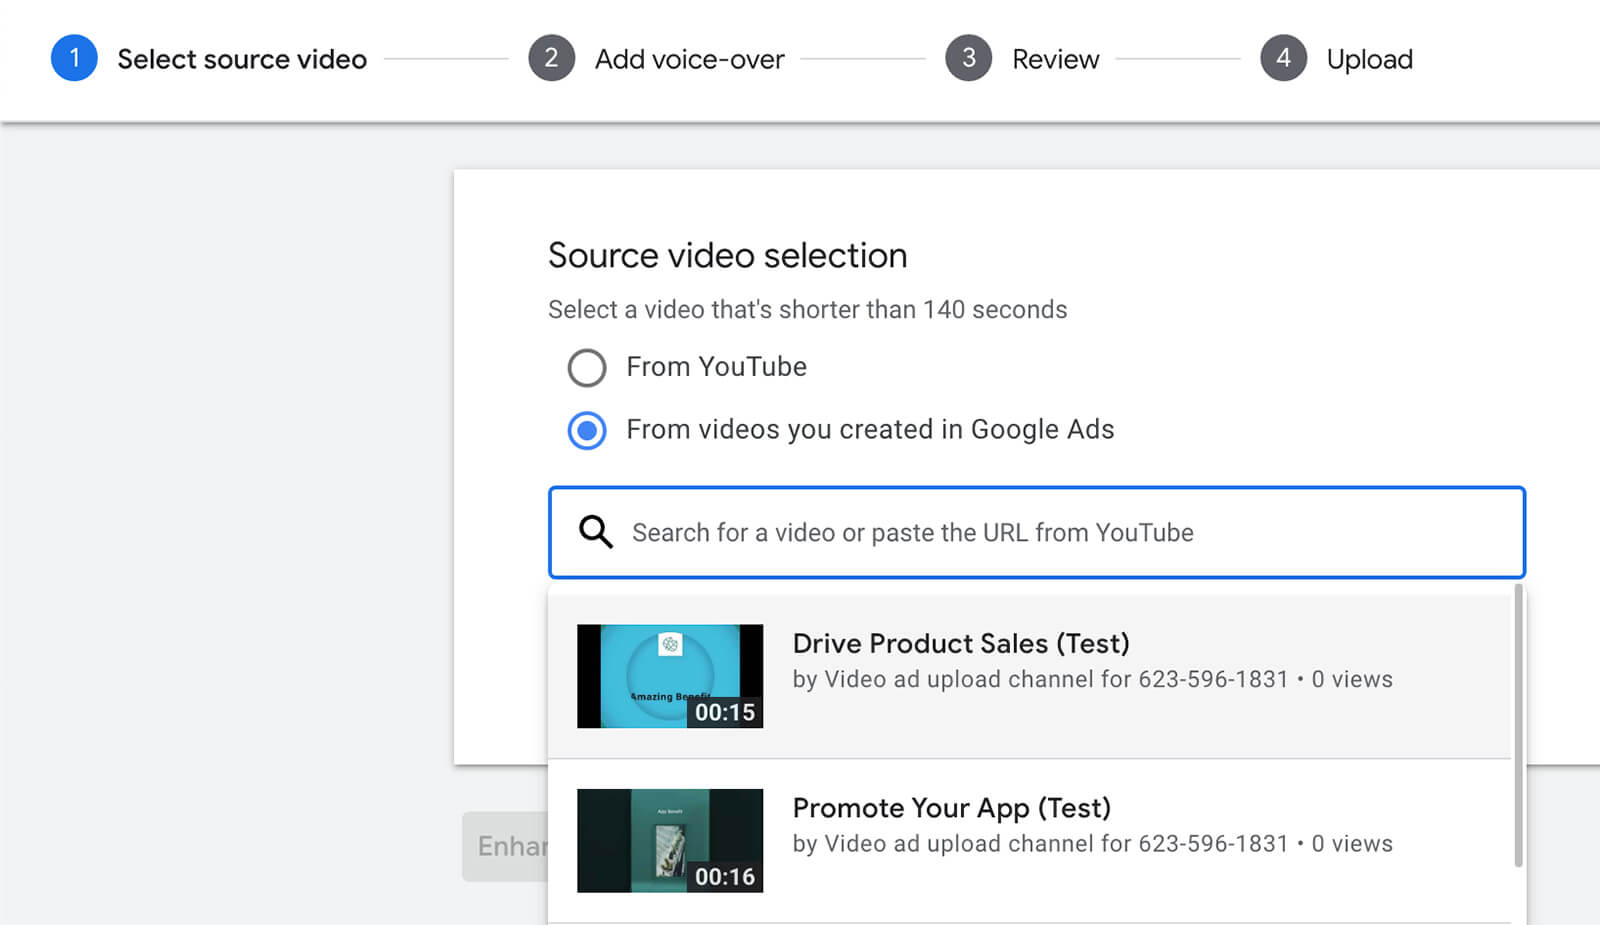 how-to-drive-product-sales-using-youtube-square-video-ads-using-google-ads-asset-library-templates-source-video-selection-add-voice-over-example-11